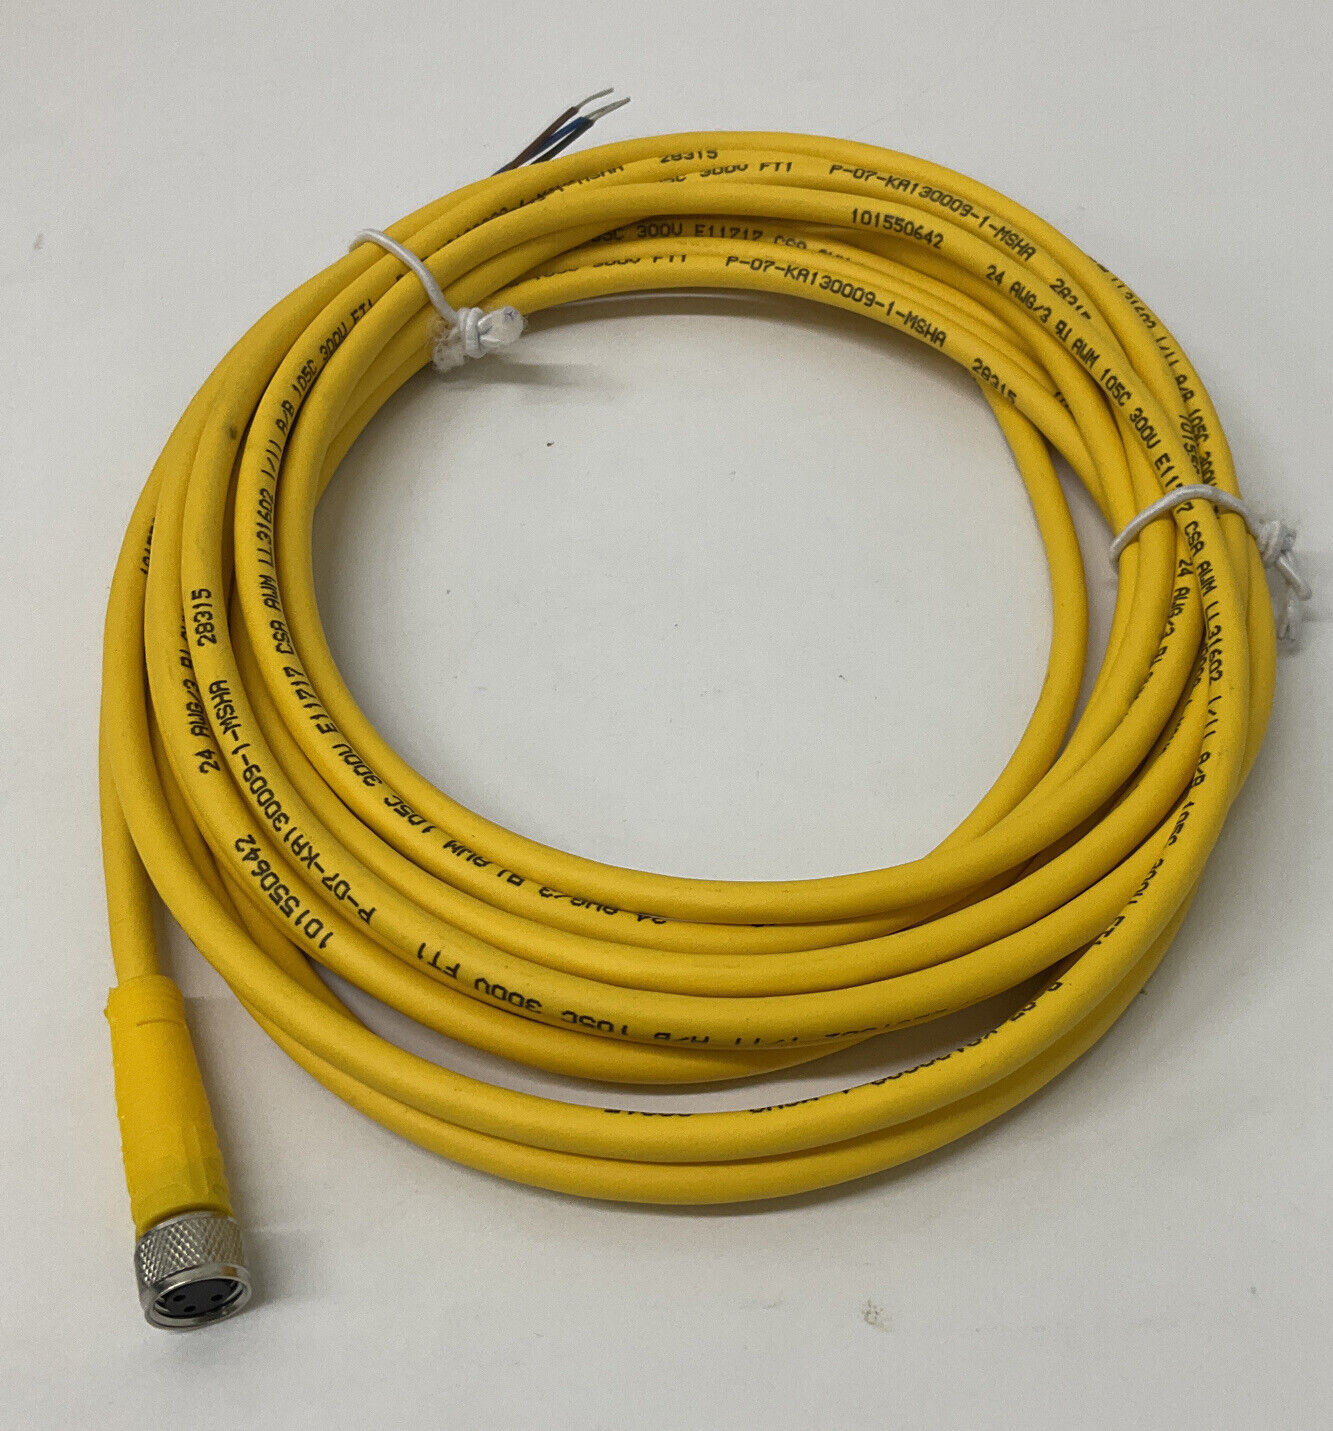 Norgren SCE13005 3-Pin M8 Straight Cable 5-Meters (GR165)